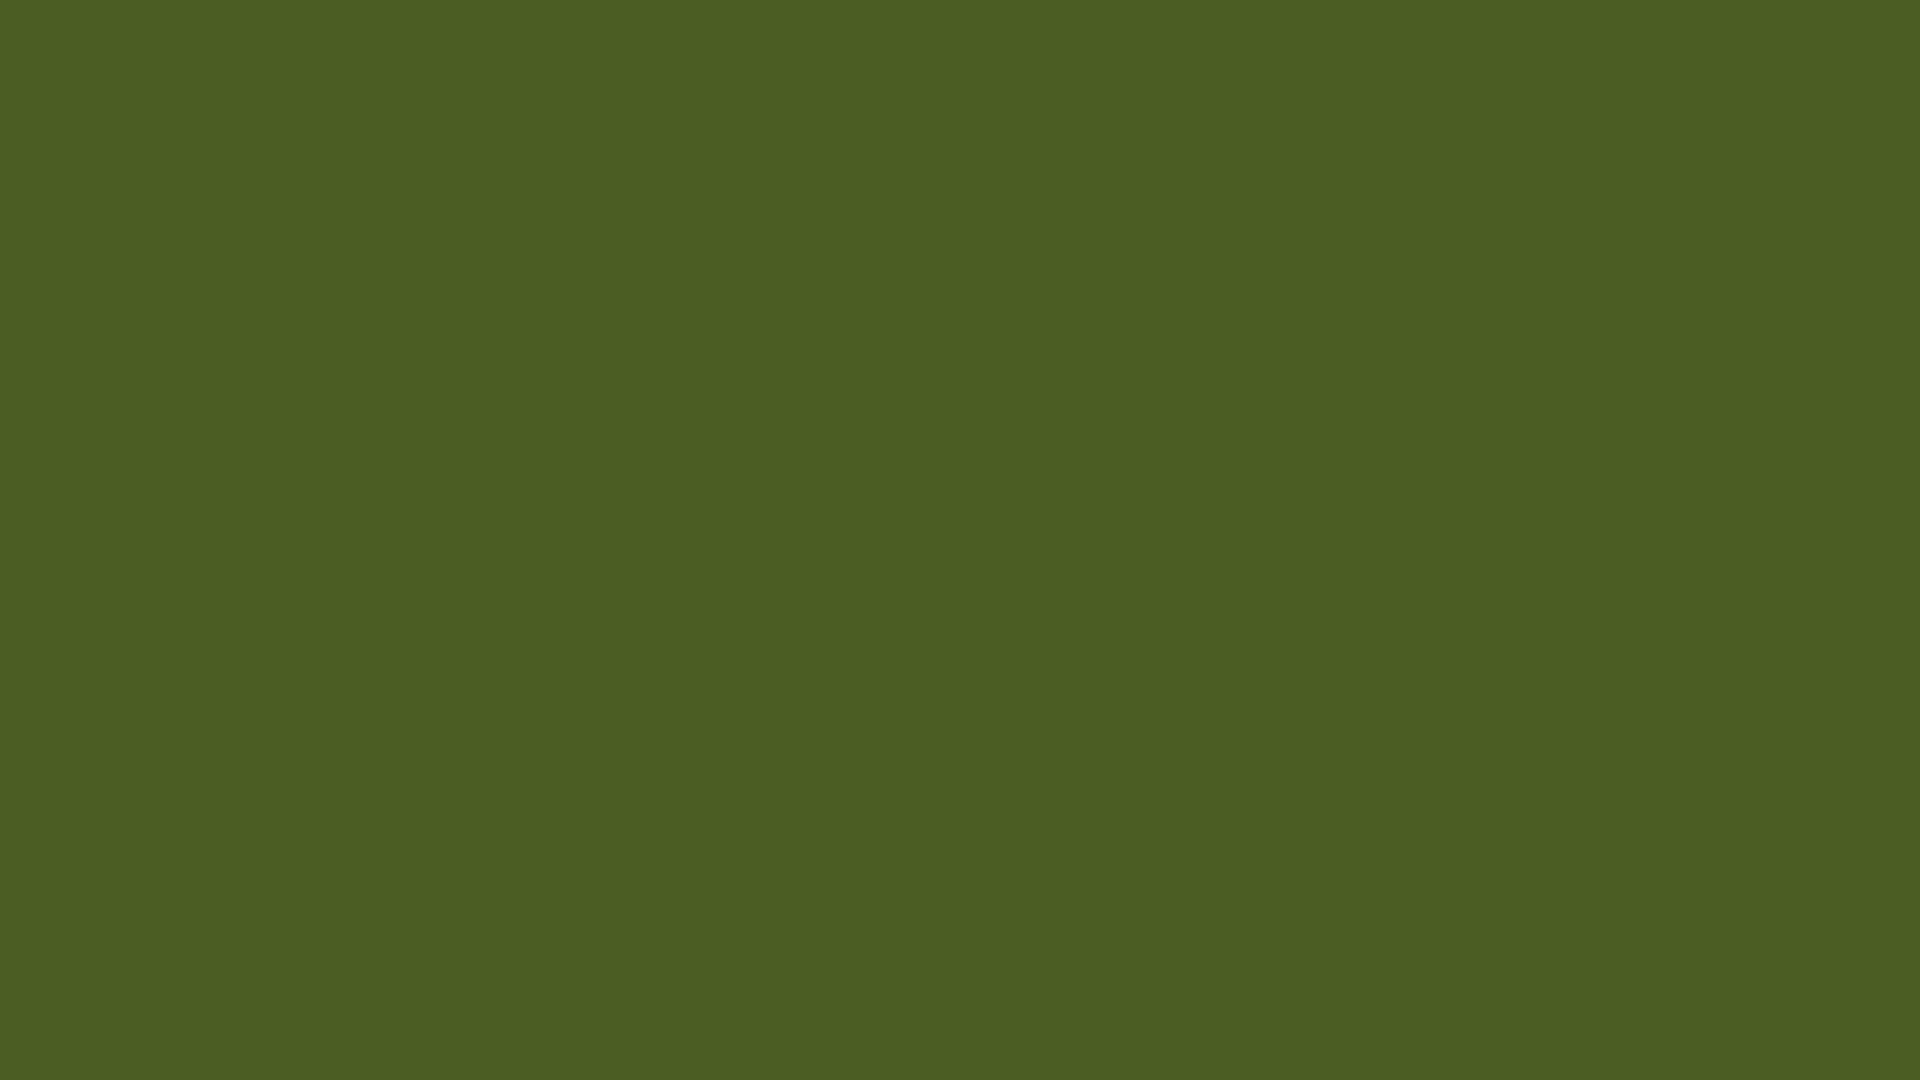 1920x1080 Dark Moss Green Solid Color Background